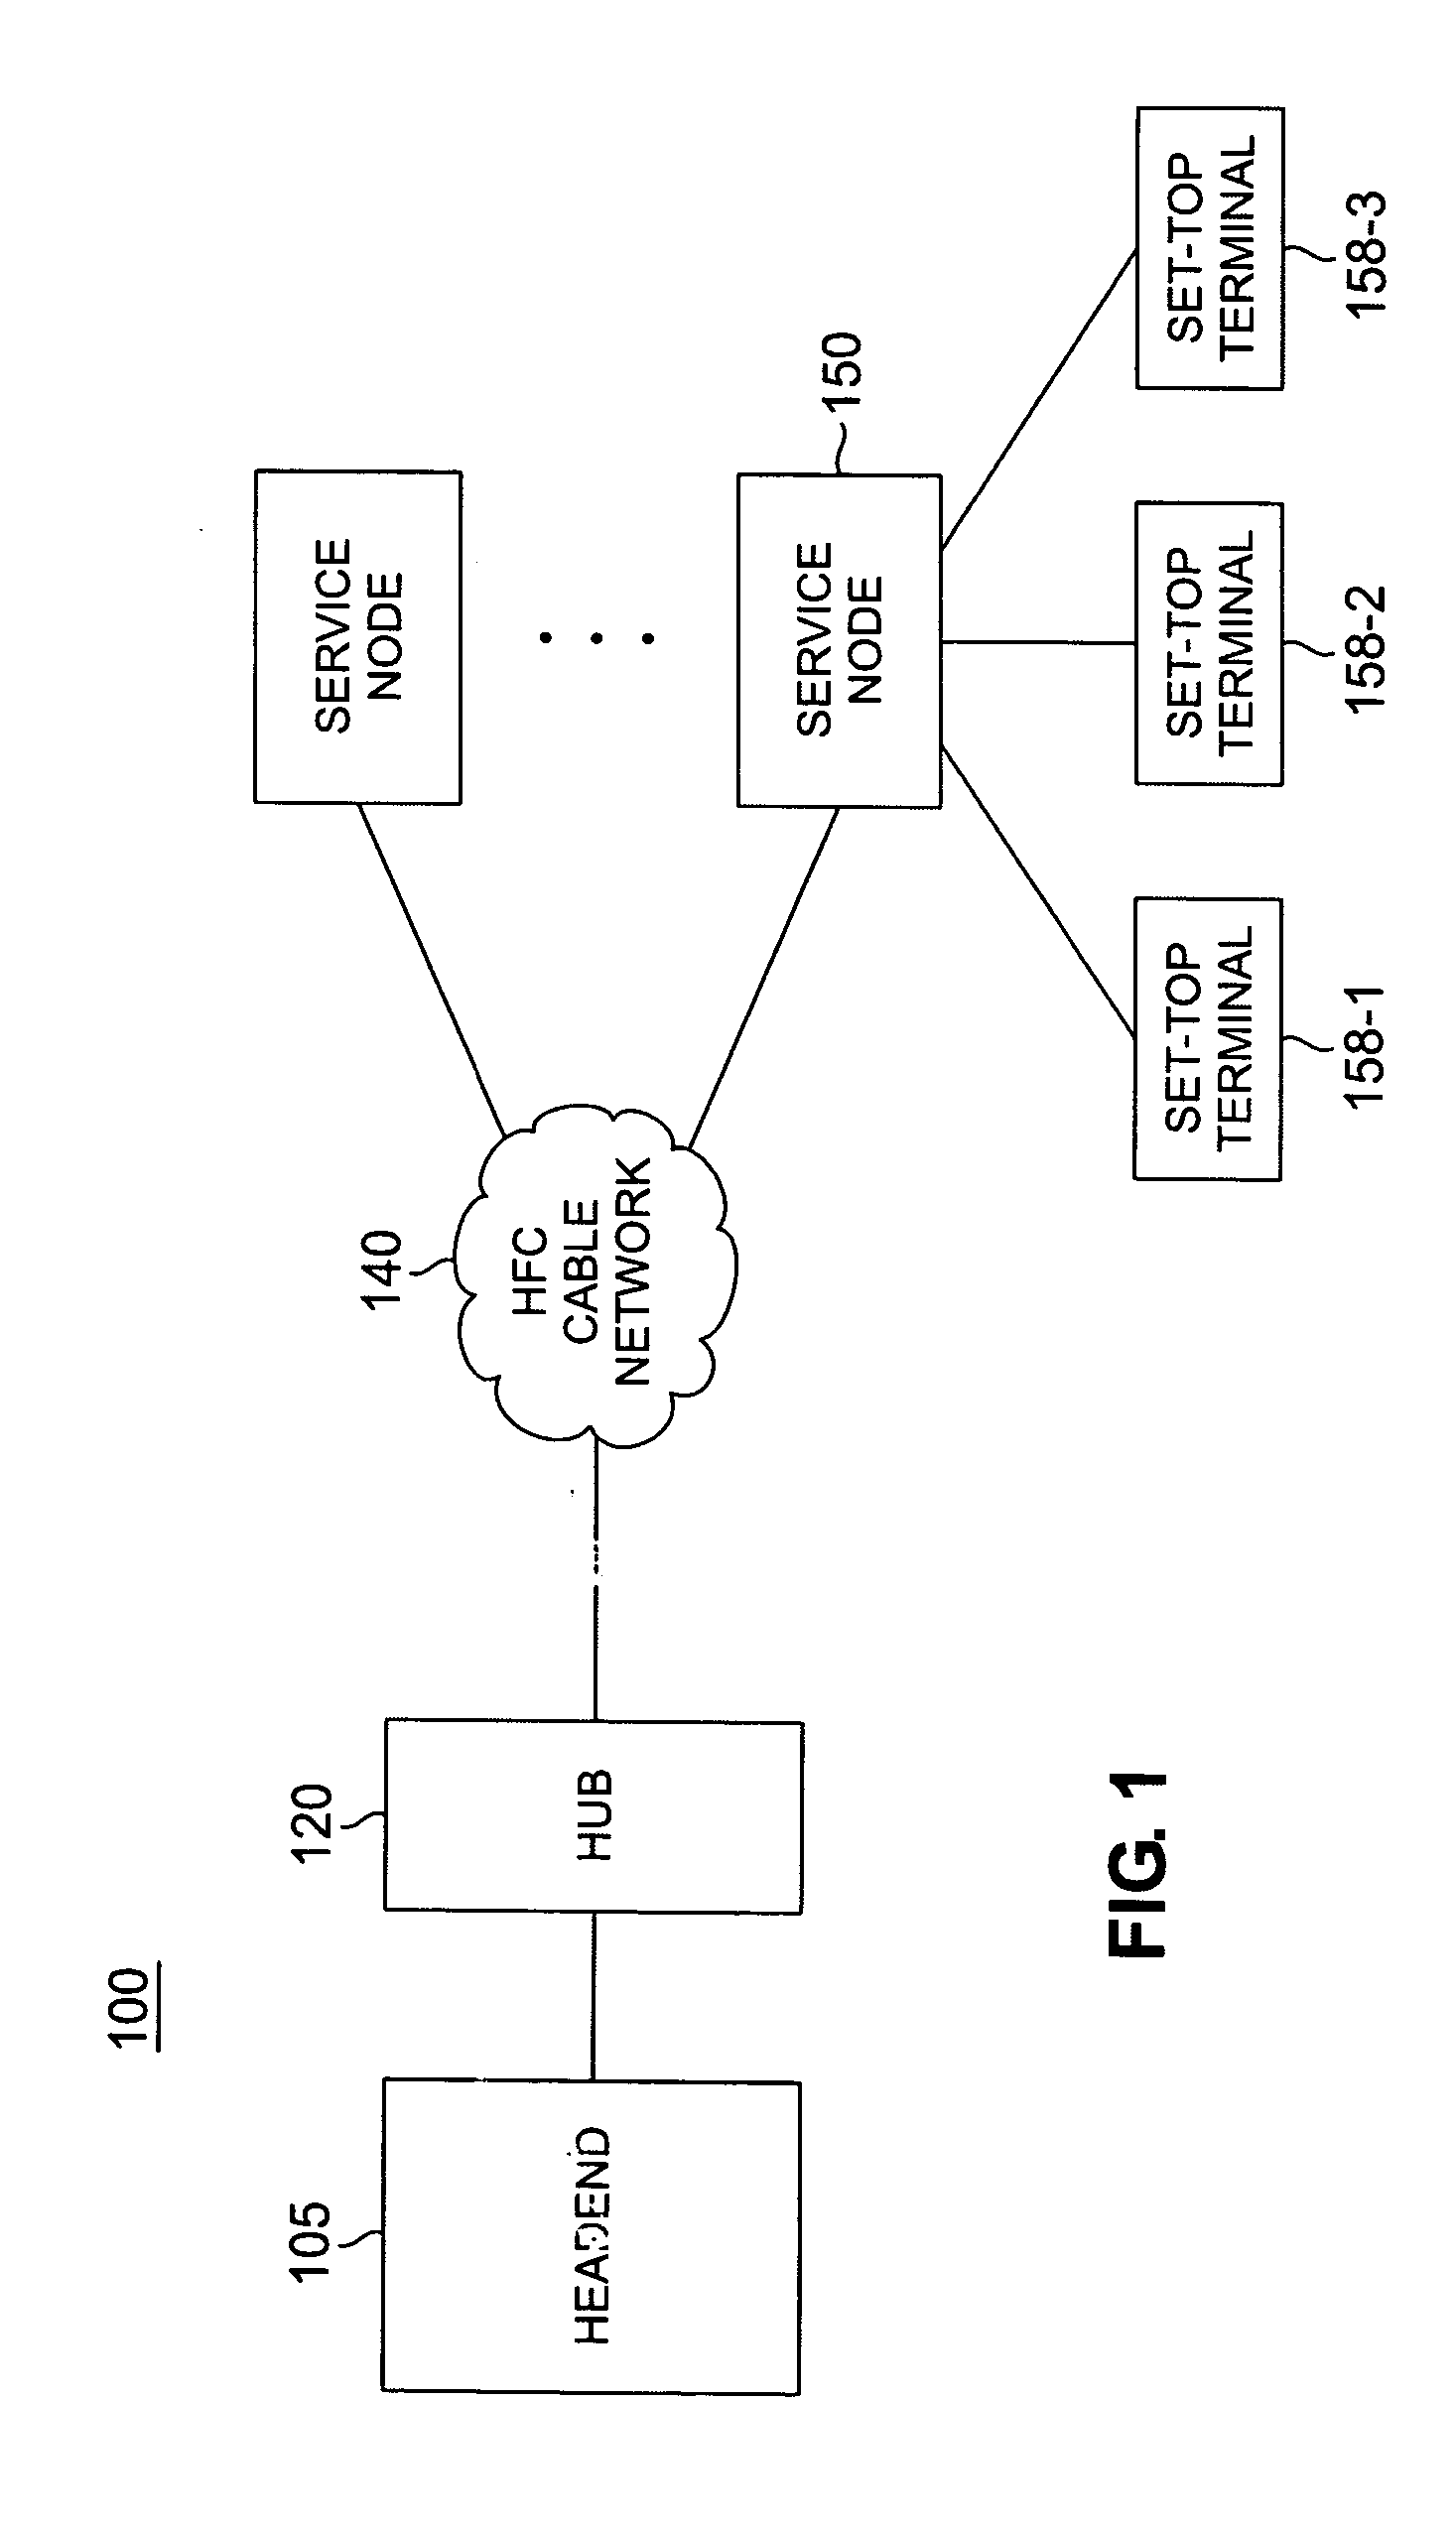 Digital video recorder for recording missed program episodes and for resolving scheduling conflicts between programs to be recorded